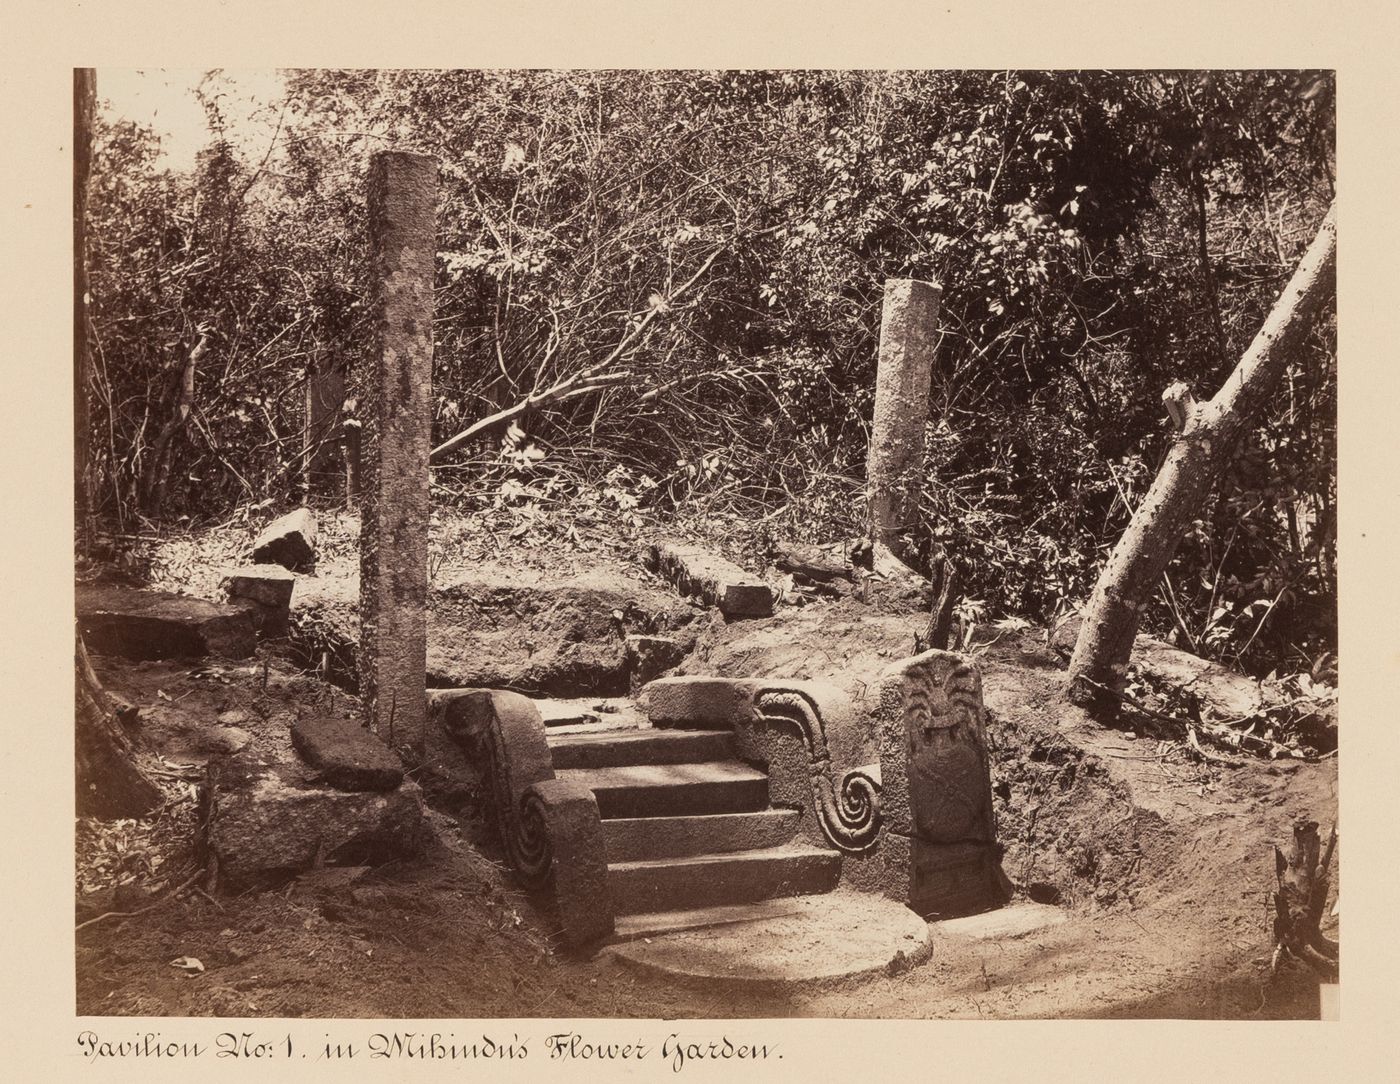 View of the ruins of Pavilion No. 1 showing a staircase and columns, Mihindu's Flower Garden, Mihintale, Ceylon (now Sri Lanka)